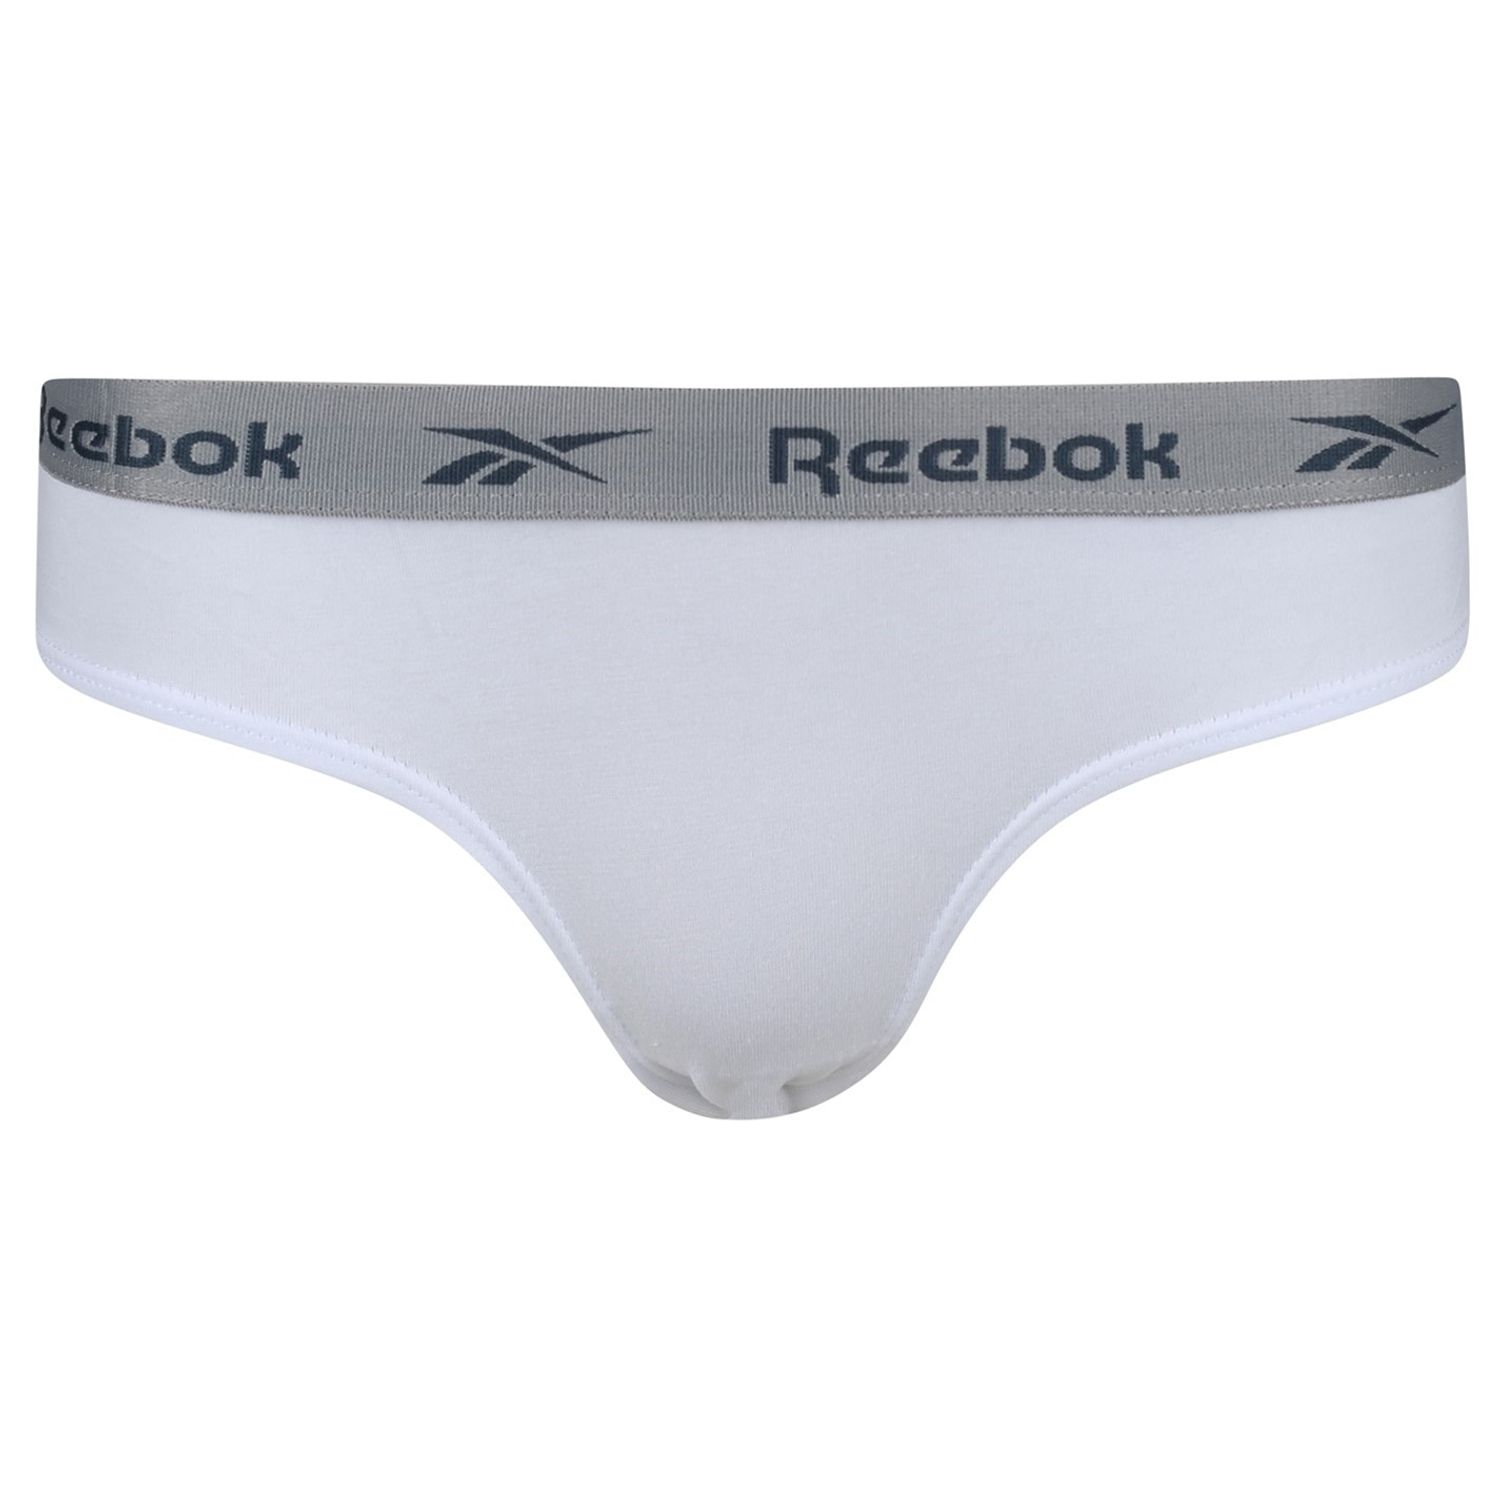 Reebok 3 Pack Cotton Thong in Multi colour